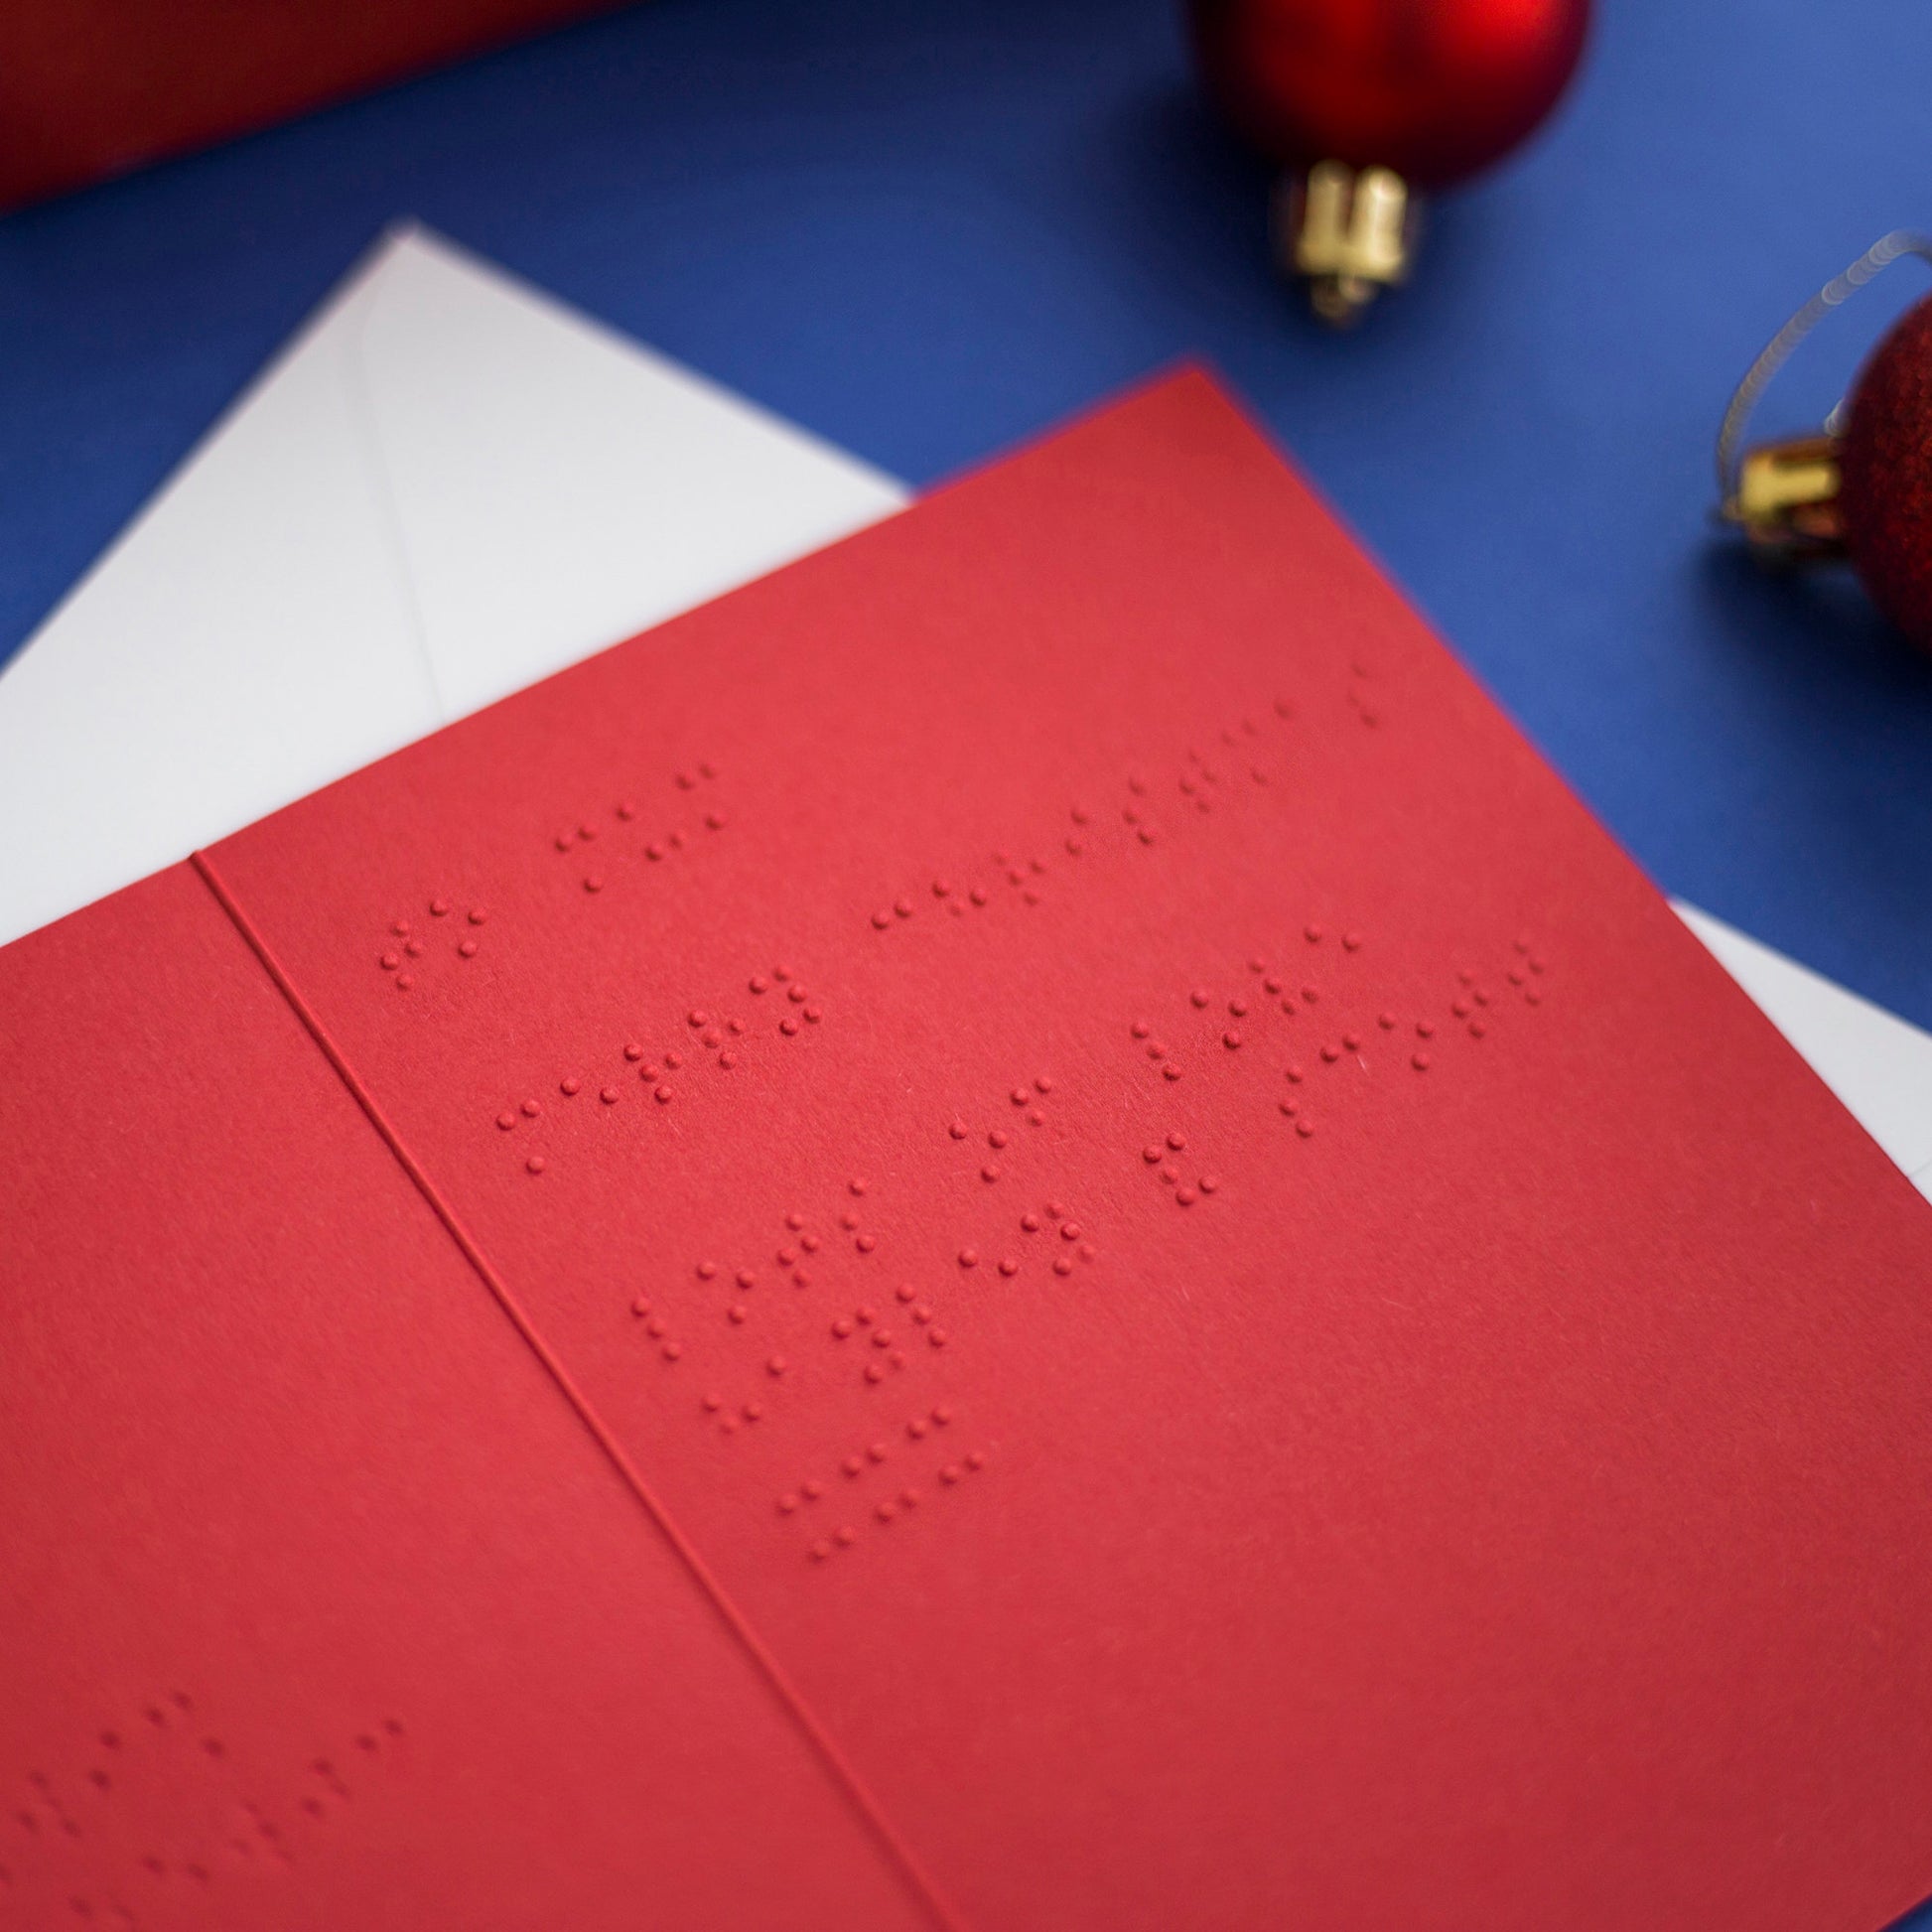 An open red Christmas card with braille inside, lay on a white envelope.